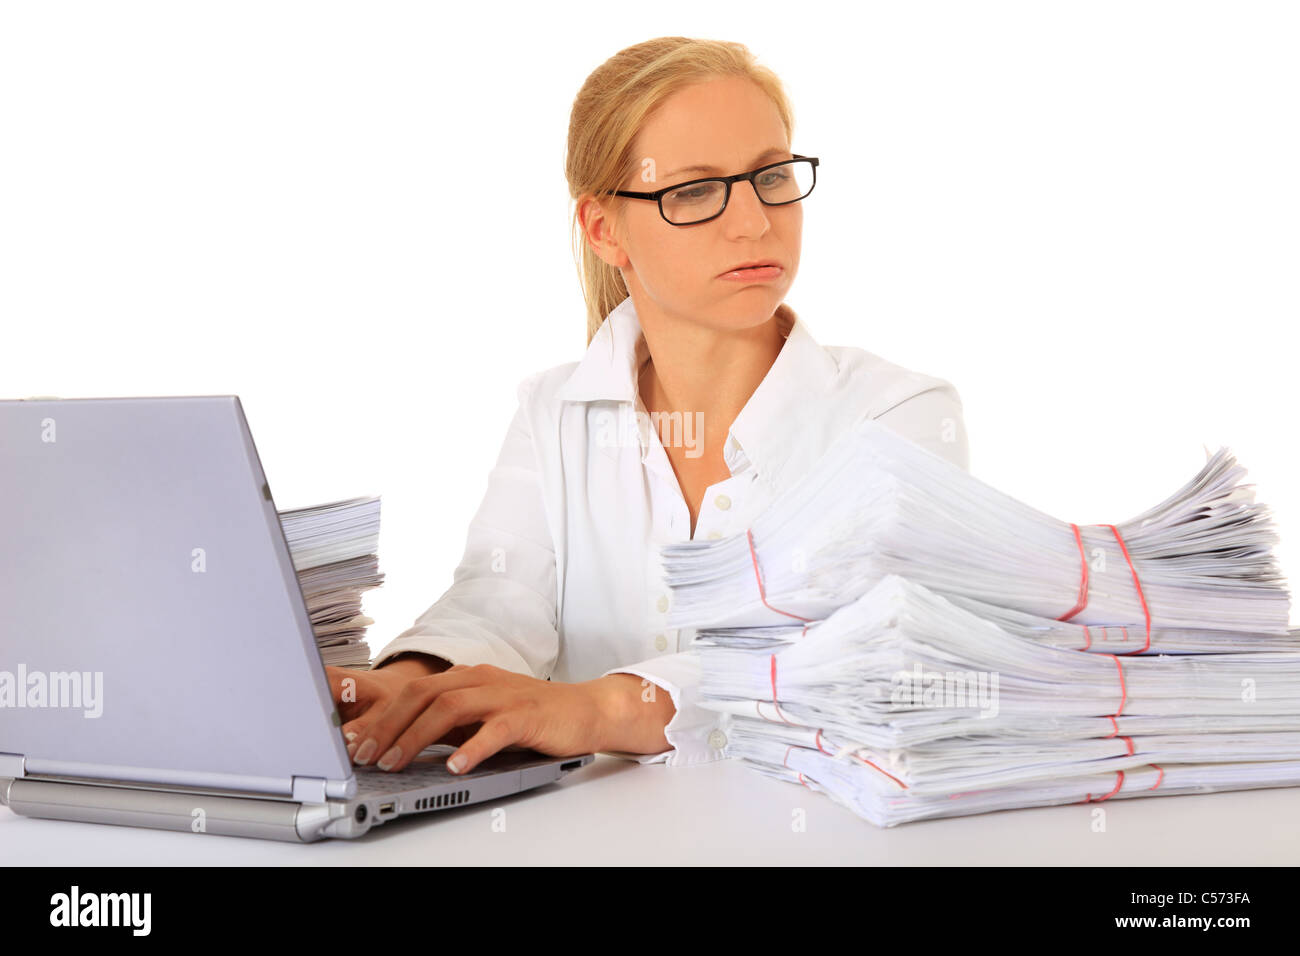 Attractive businesswoman working. All on white background. Stock Photo